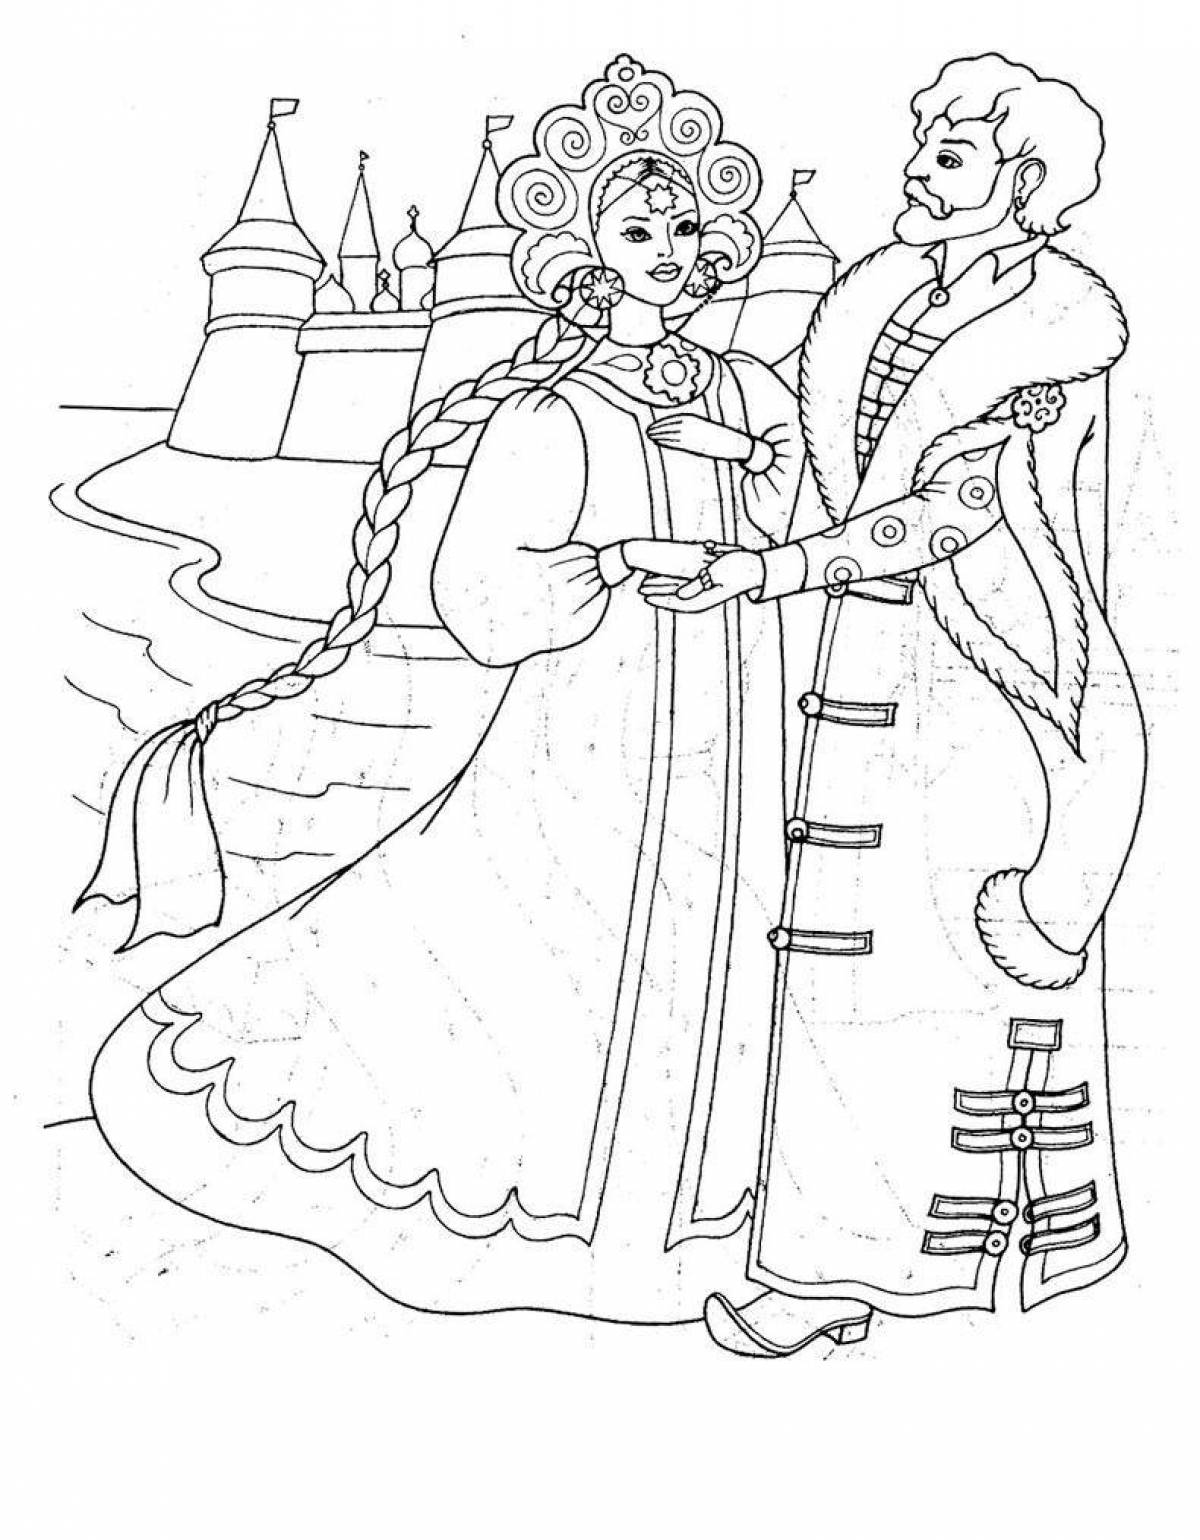 A fascinating coloring book based on Pushkin's fairy tales